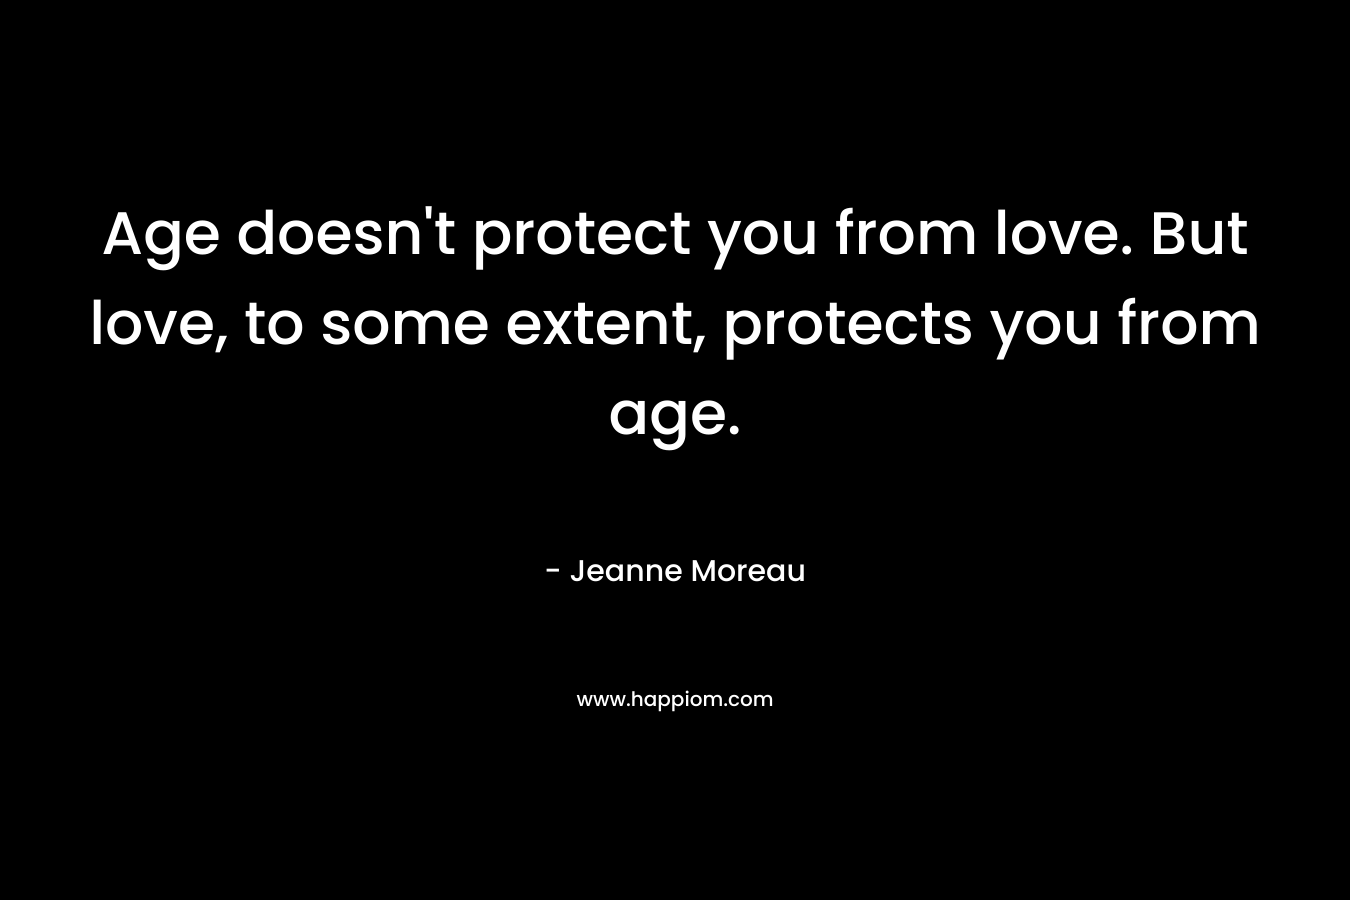 Age doesn’t protect you from love. But love, to some extent, protects you from age. – Jeanne Moreau